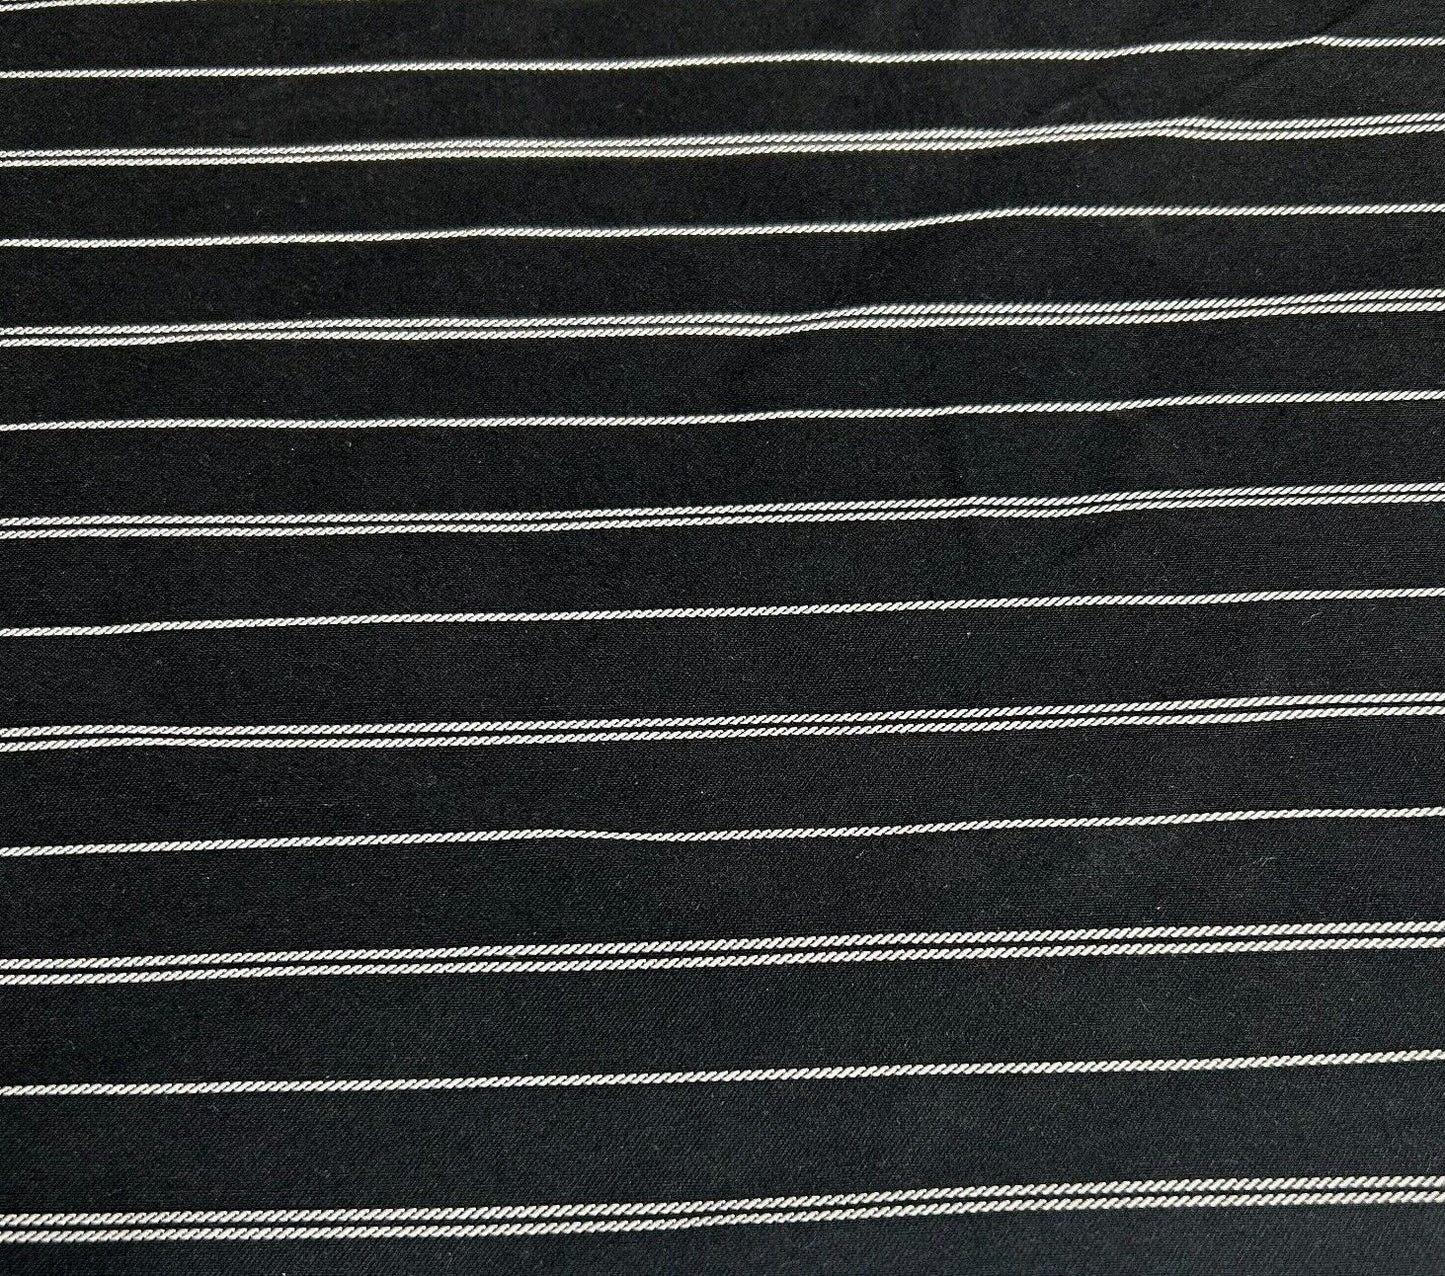 Bengaline Fabric Black White Striped 2-Way Stretch 55'' Wide Sold By The Metre